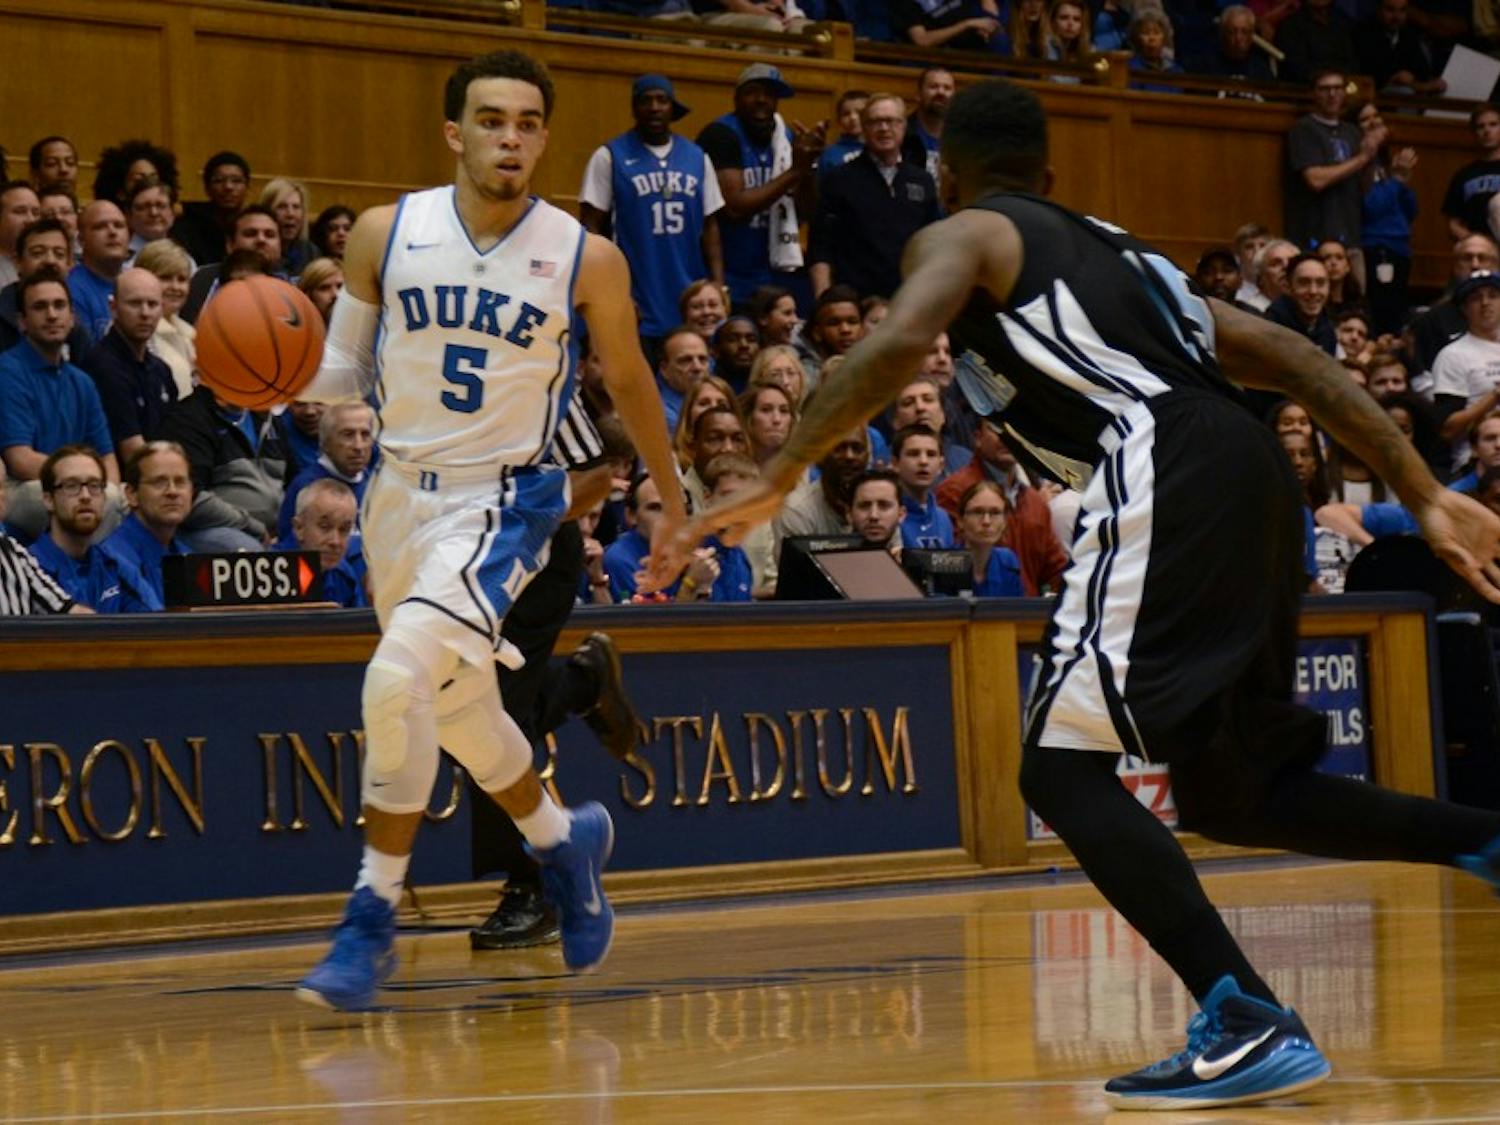 Duke freshman Tyus Jones dished out 11 assists against Livingstone Tuesday night, and will continue to facilitate the offense all season long.